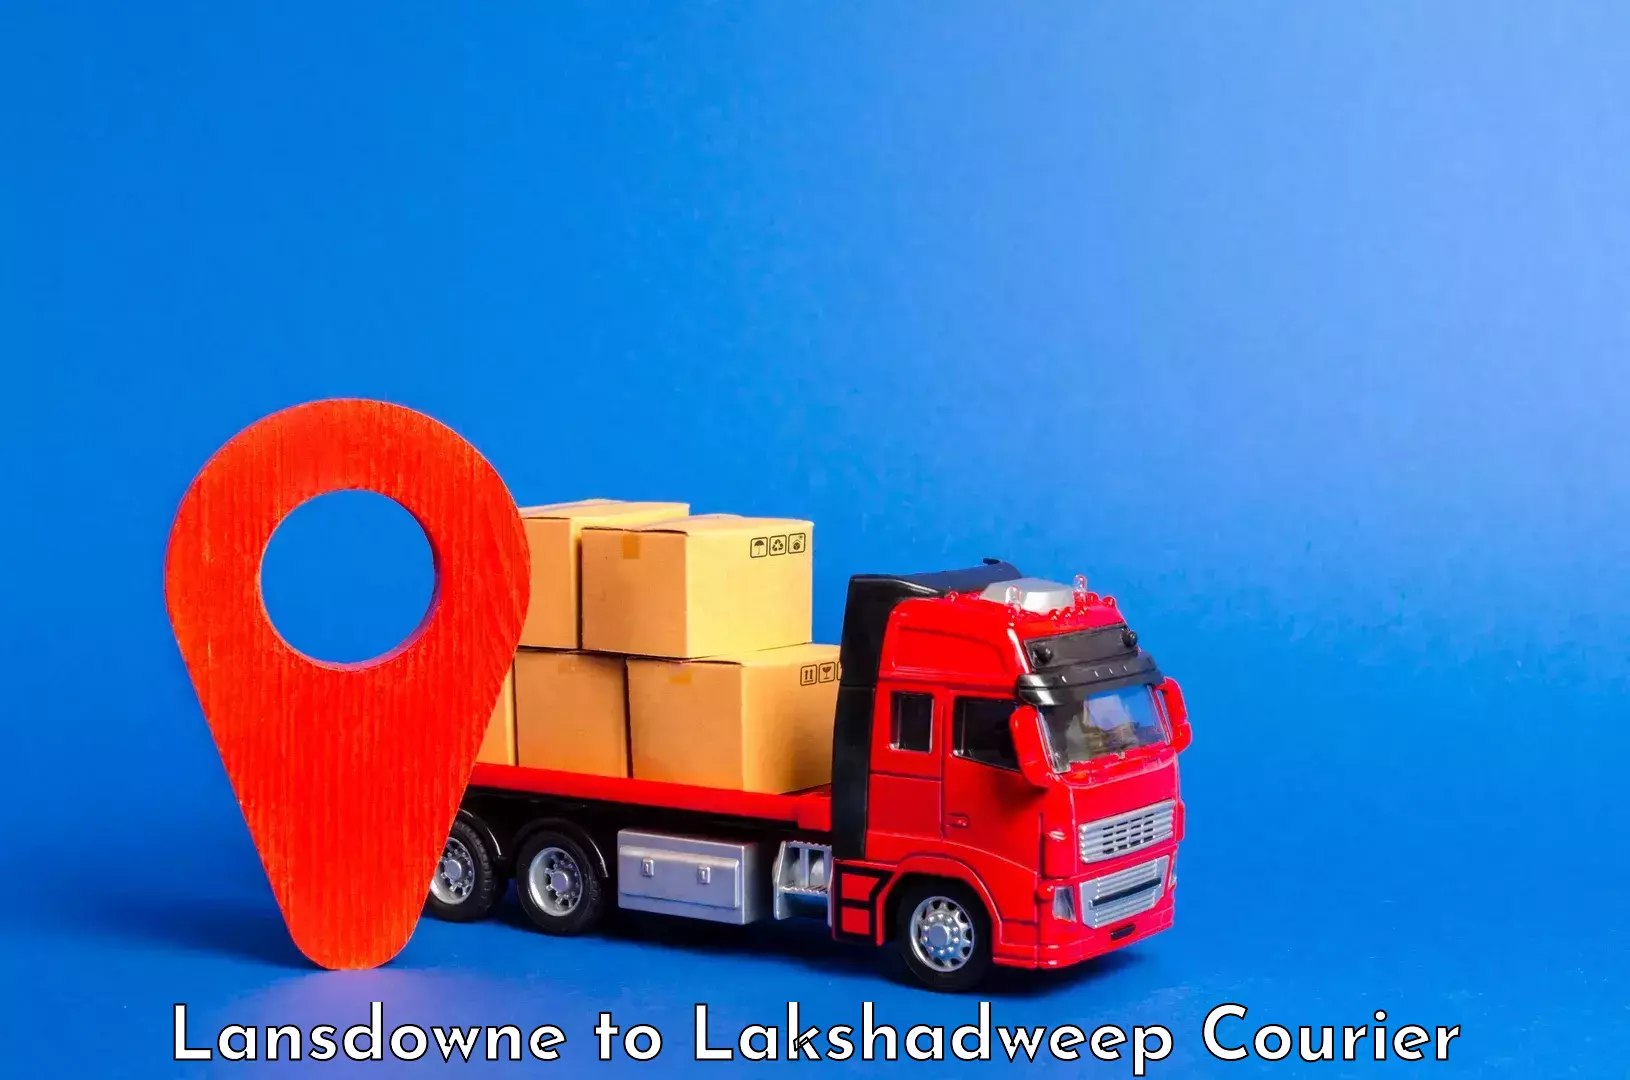 Express luggage delivery in Lansdowne to Lakshadweep